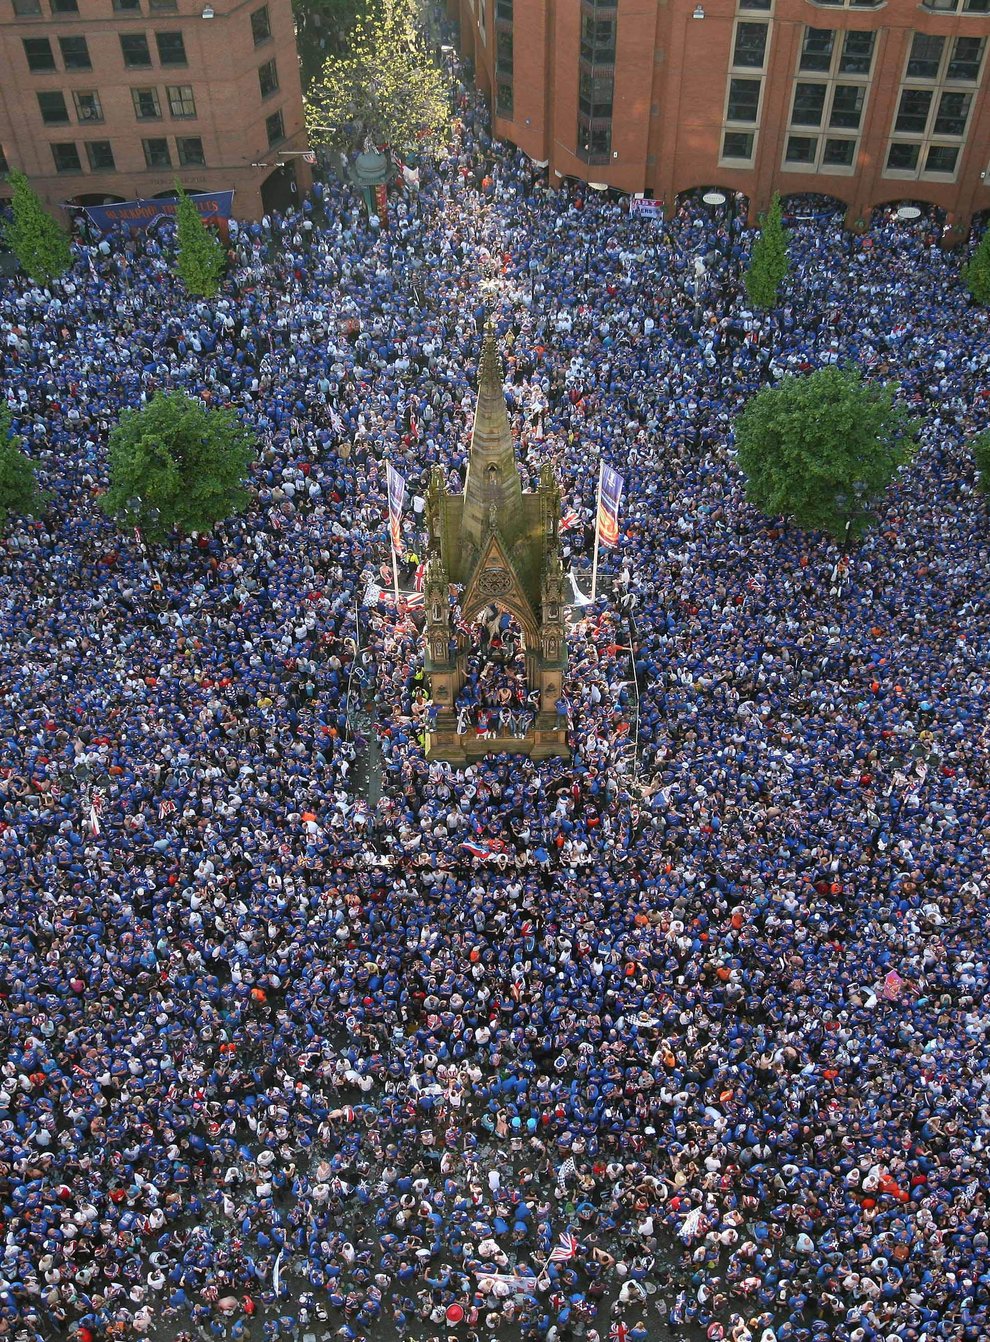 Tens of thousands of Rangers fans gathered for the UEFA Cup final in Manchester in 2008 (PA)